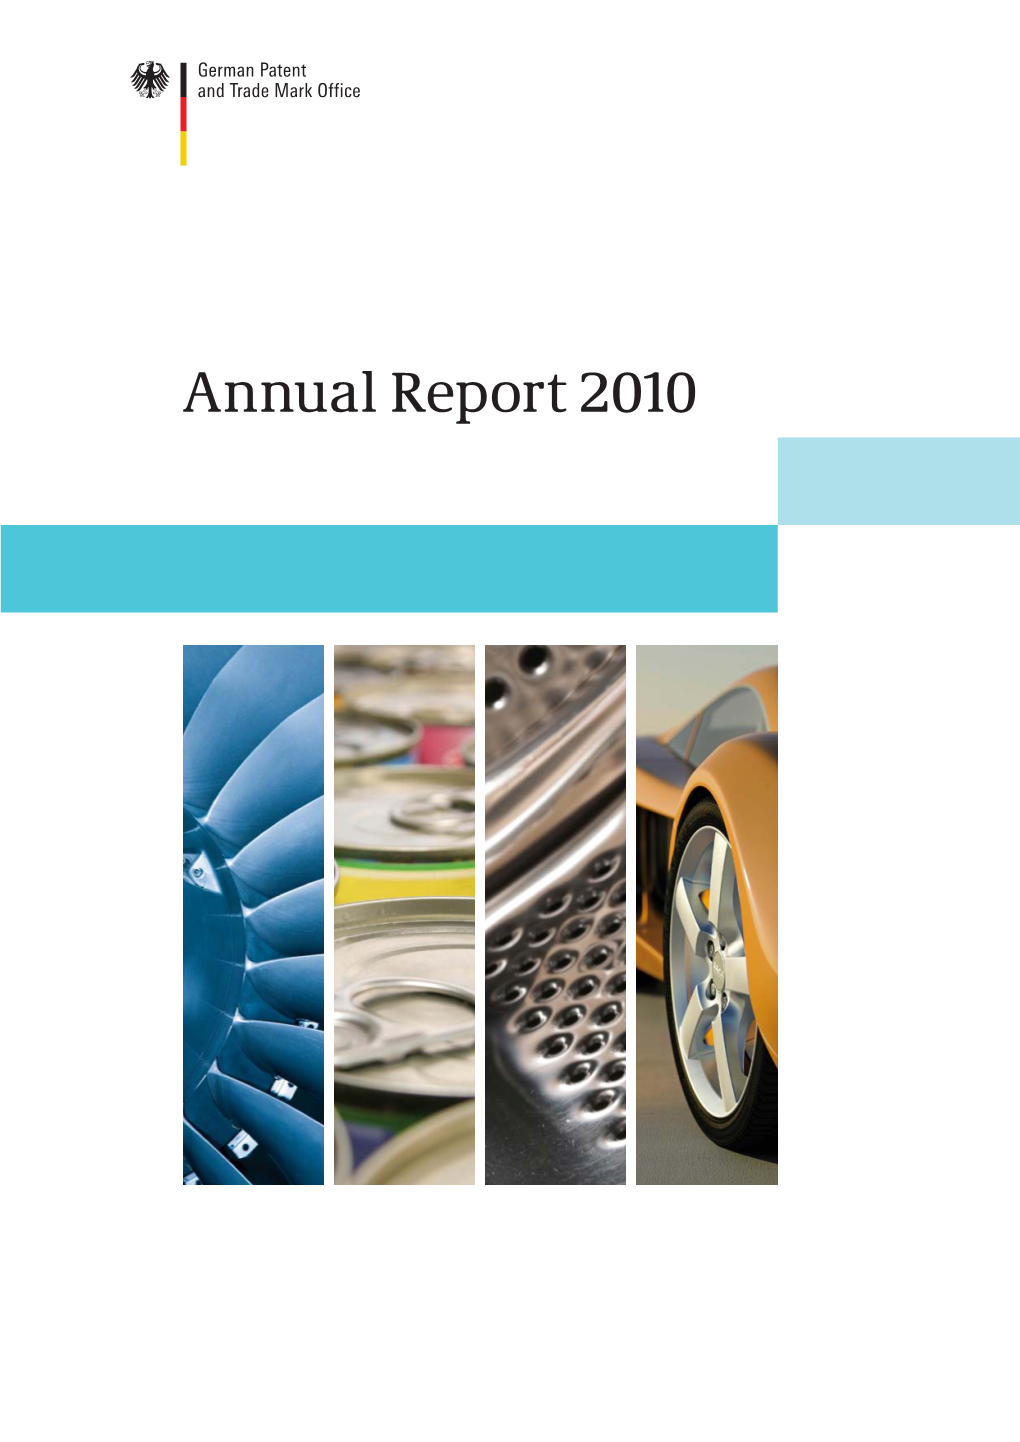 Annual Report 2010 at a Glance